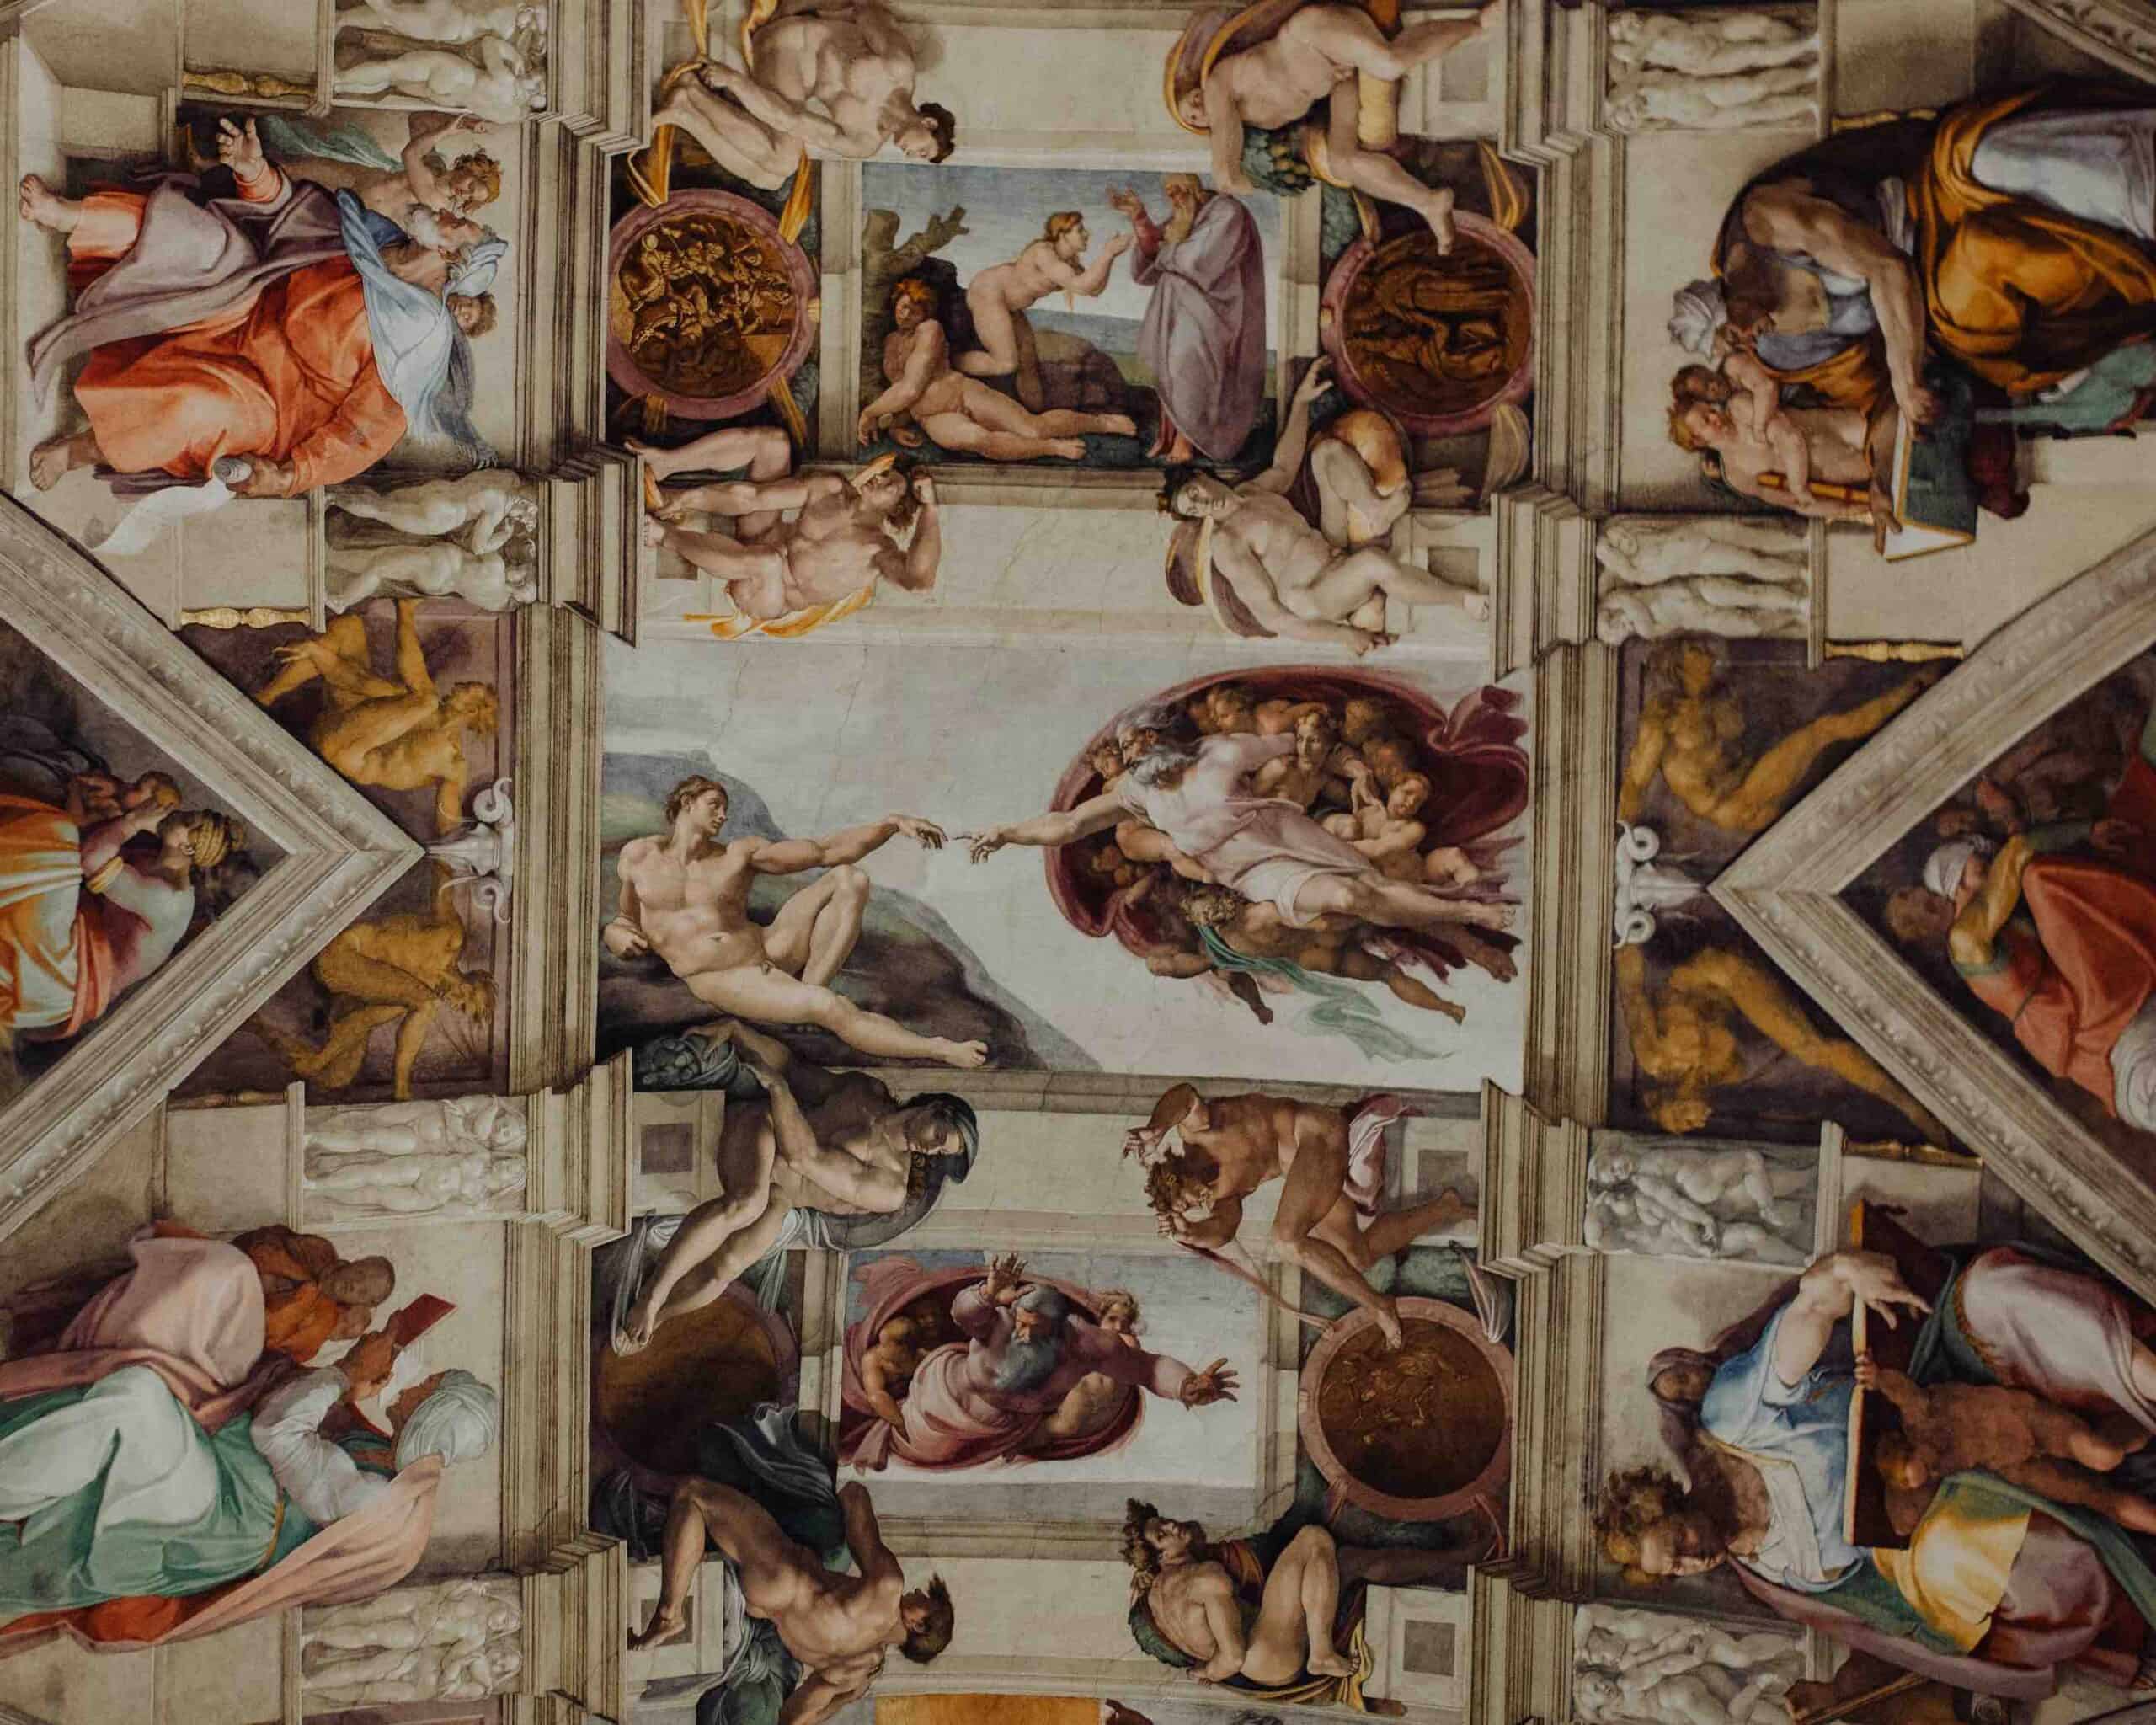 Michelangelo's frescoes "The Creation of Adam" in the Sistine Chapel. 